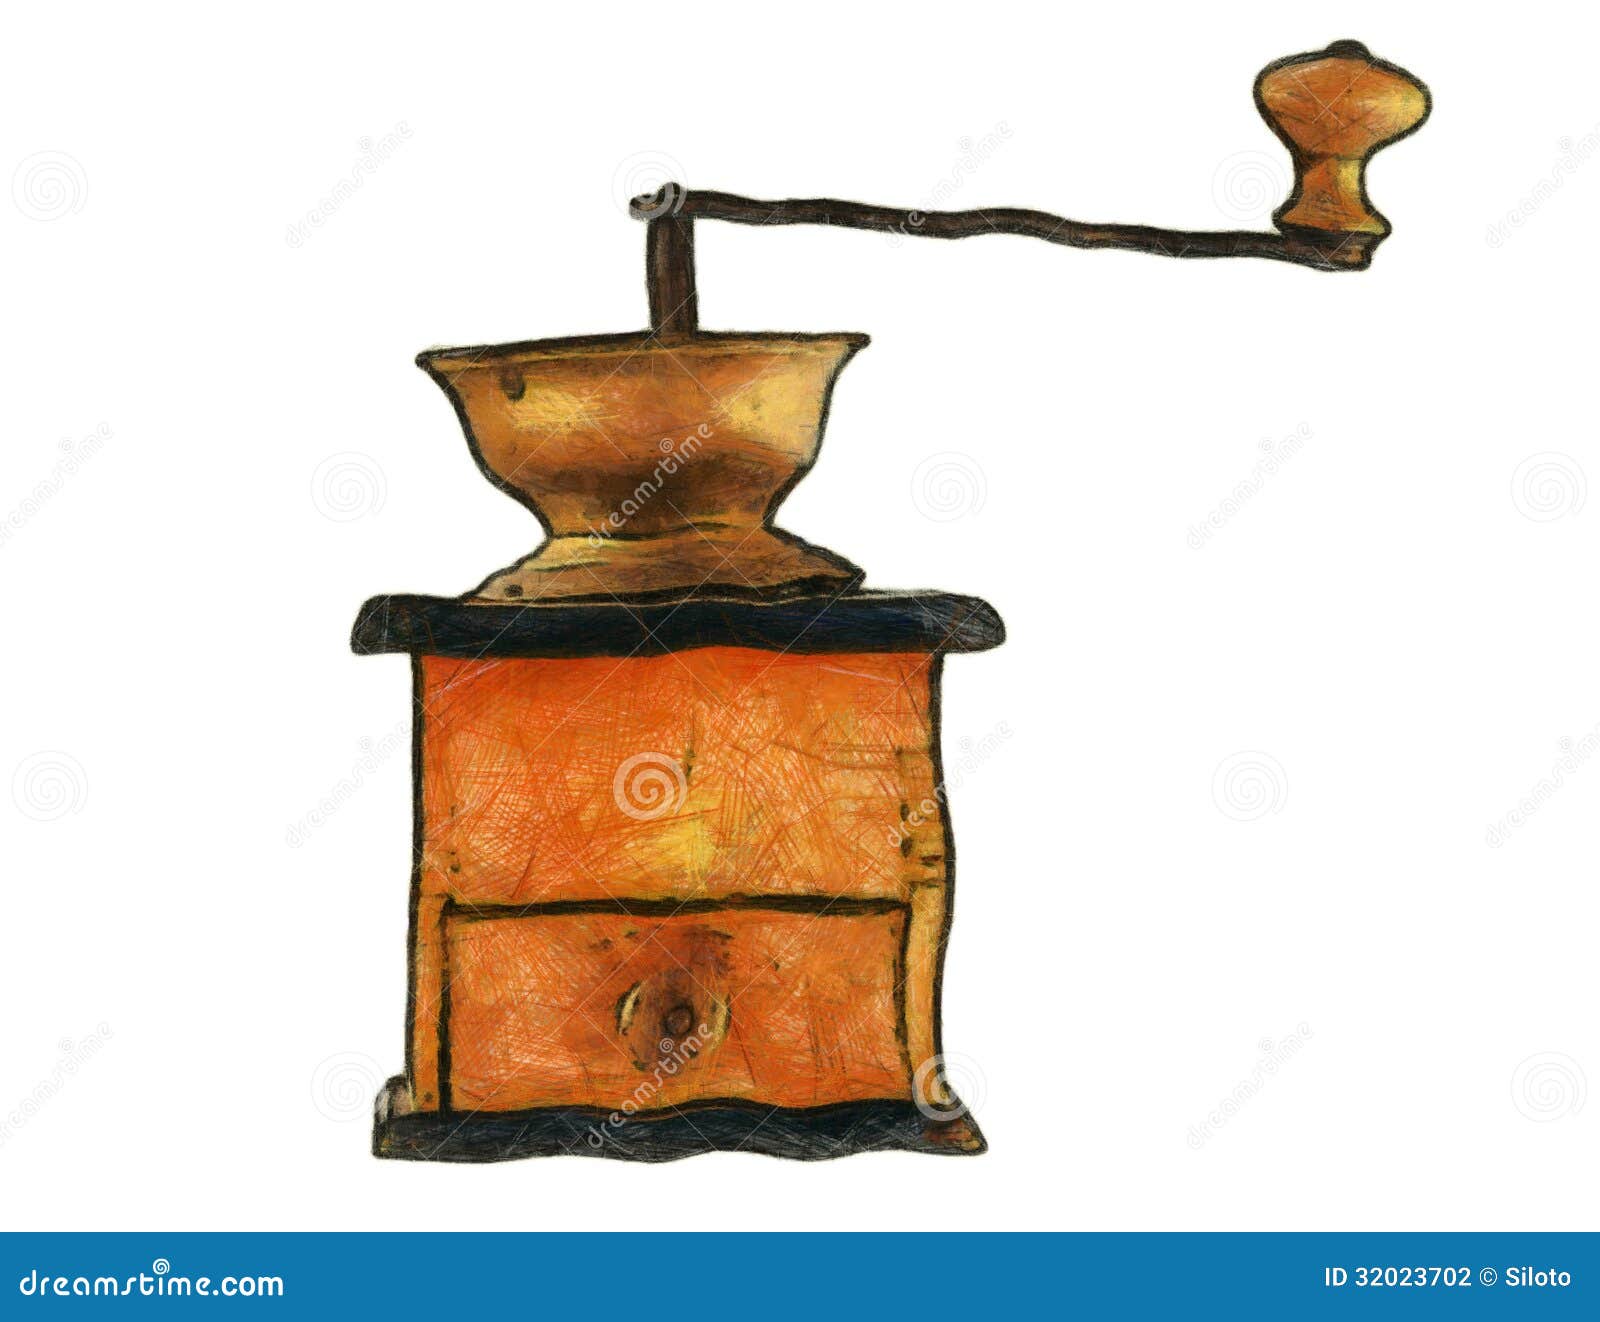 coffee grinder clipart - photo #8